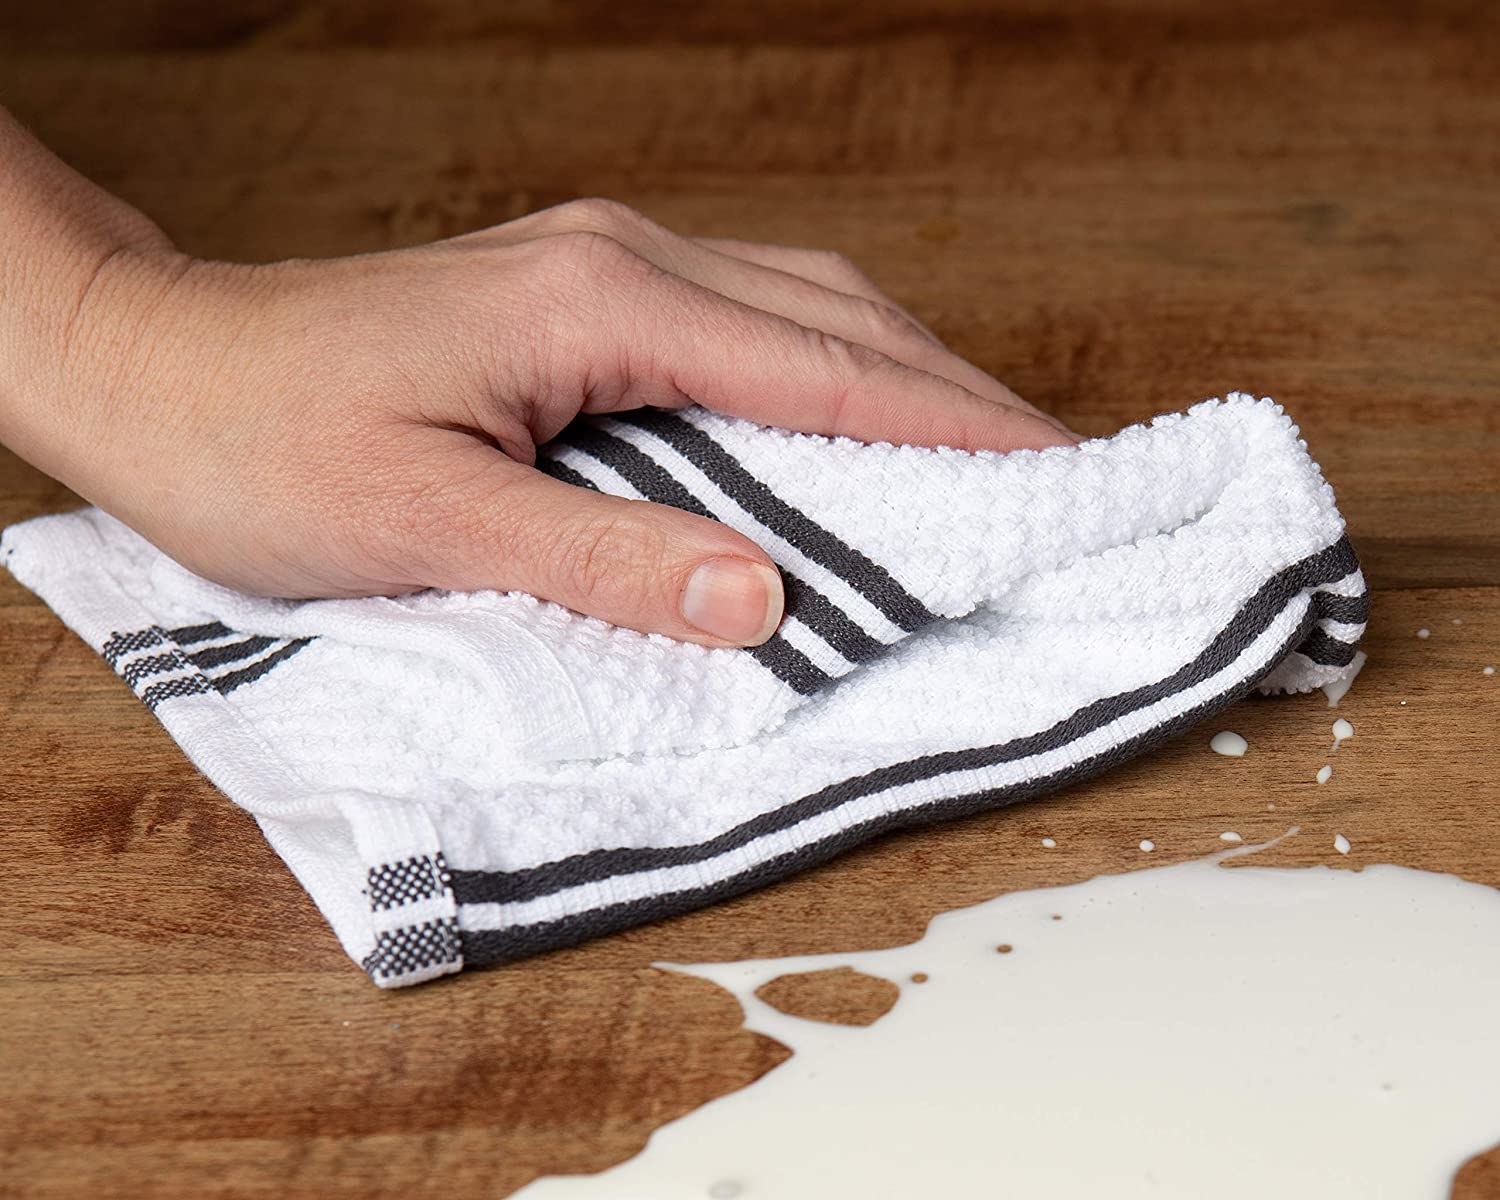 Person mopping up a spill with the dish towel